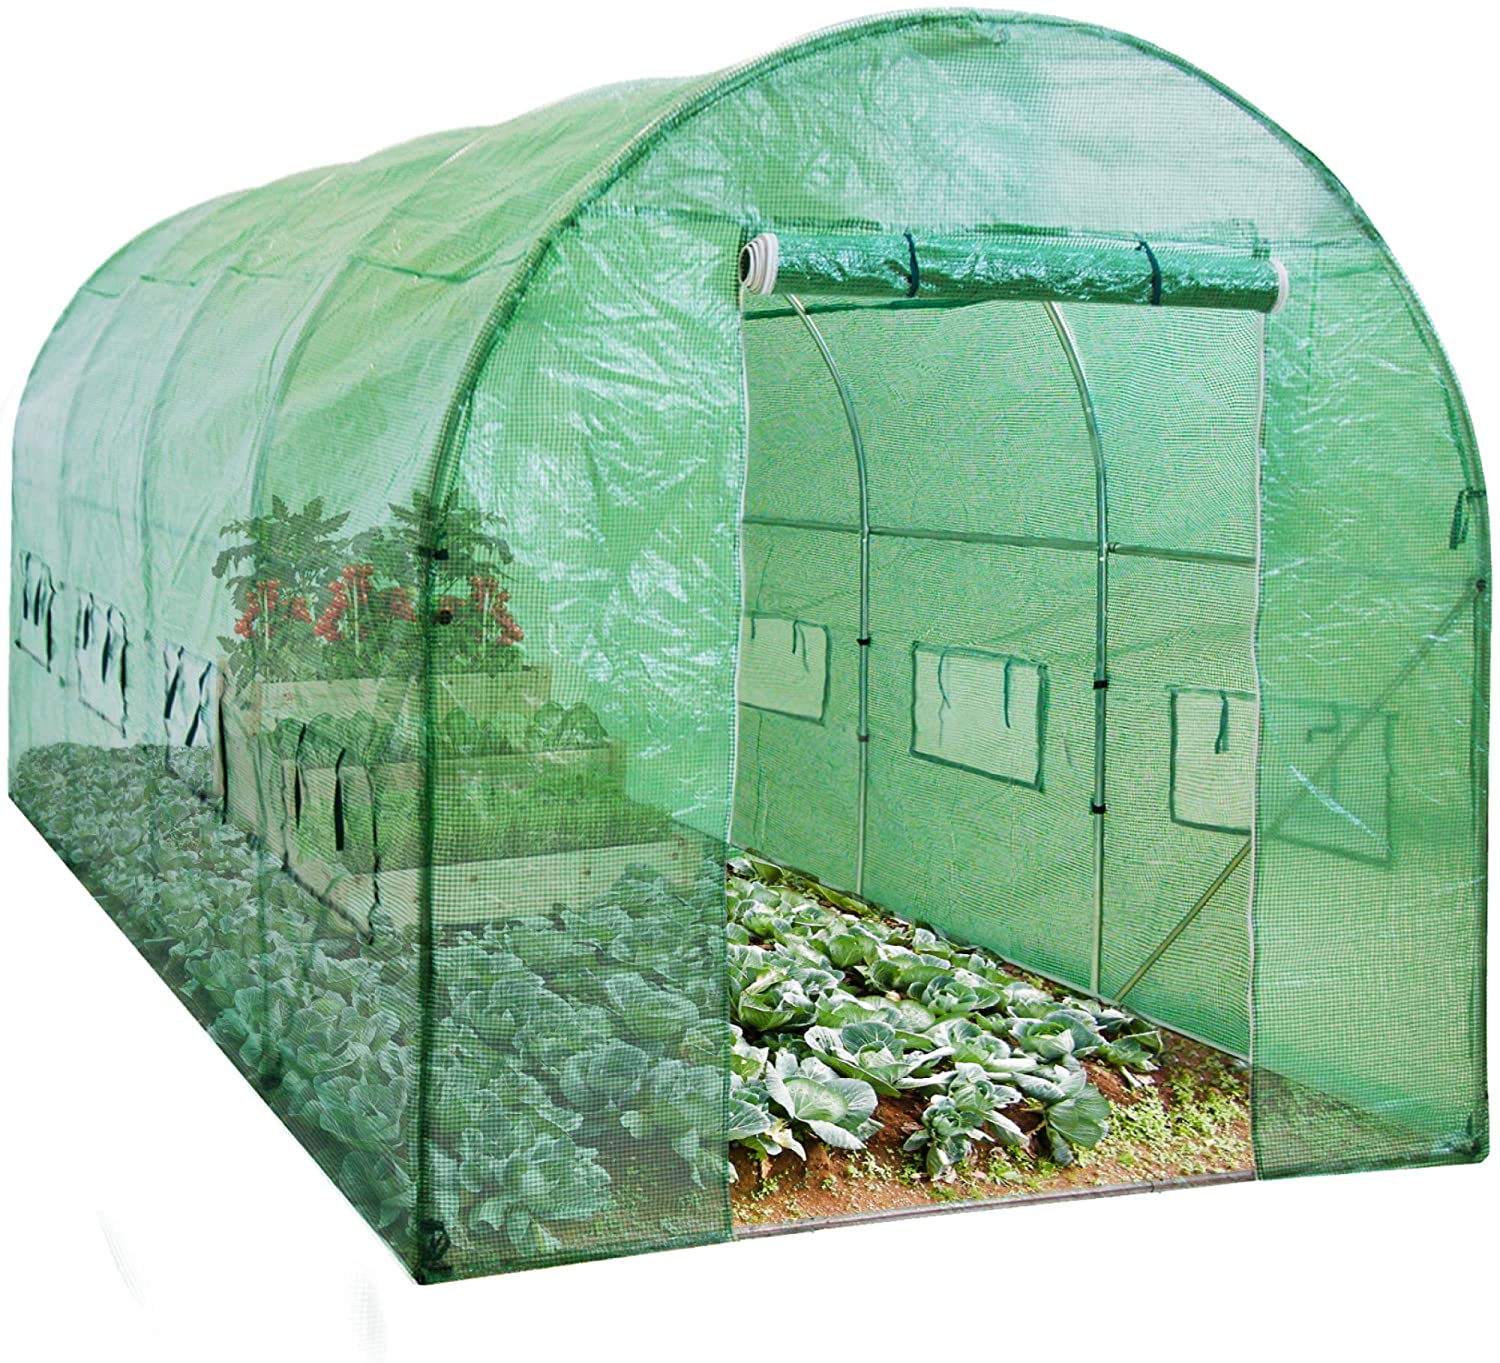 Review of Best Choice Products 15x7x7ft Walk-in Greenhouse Tunnel